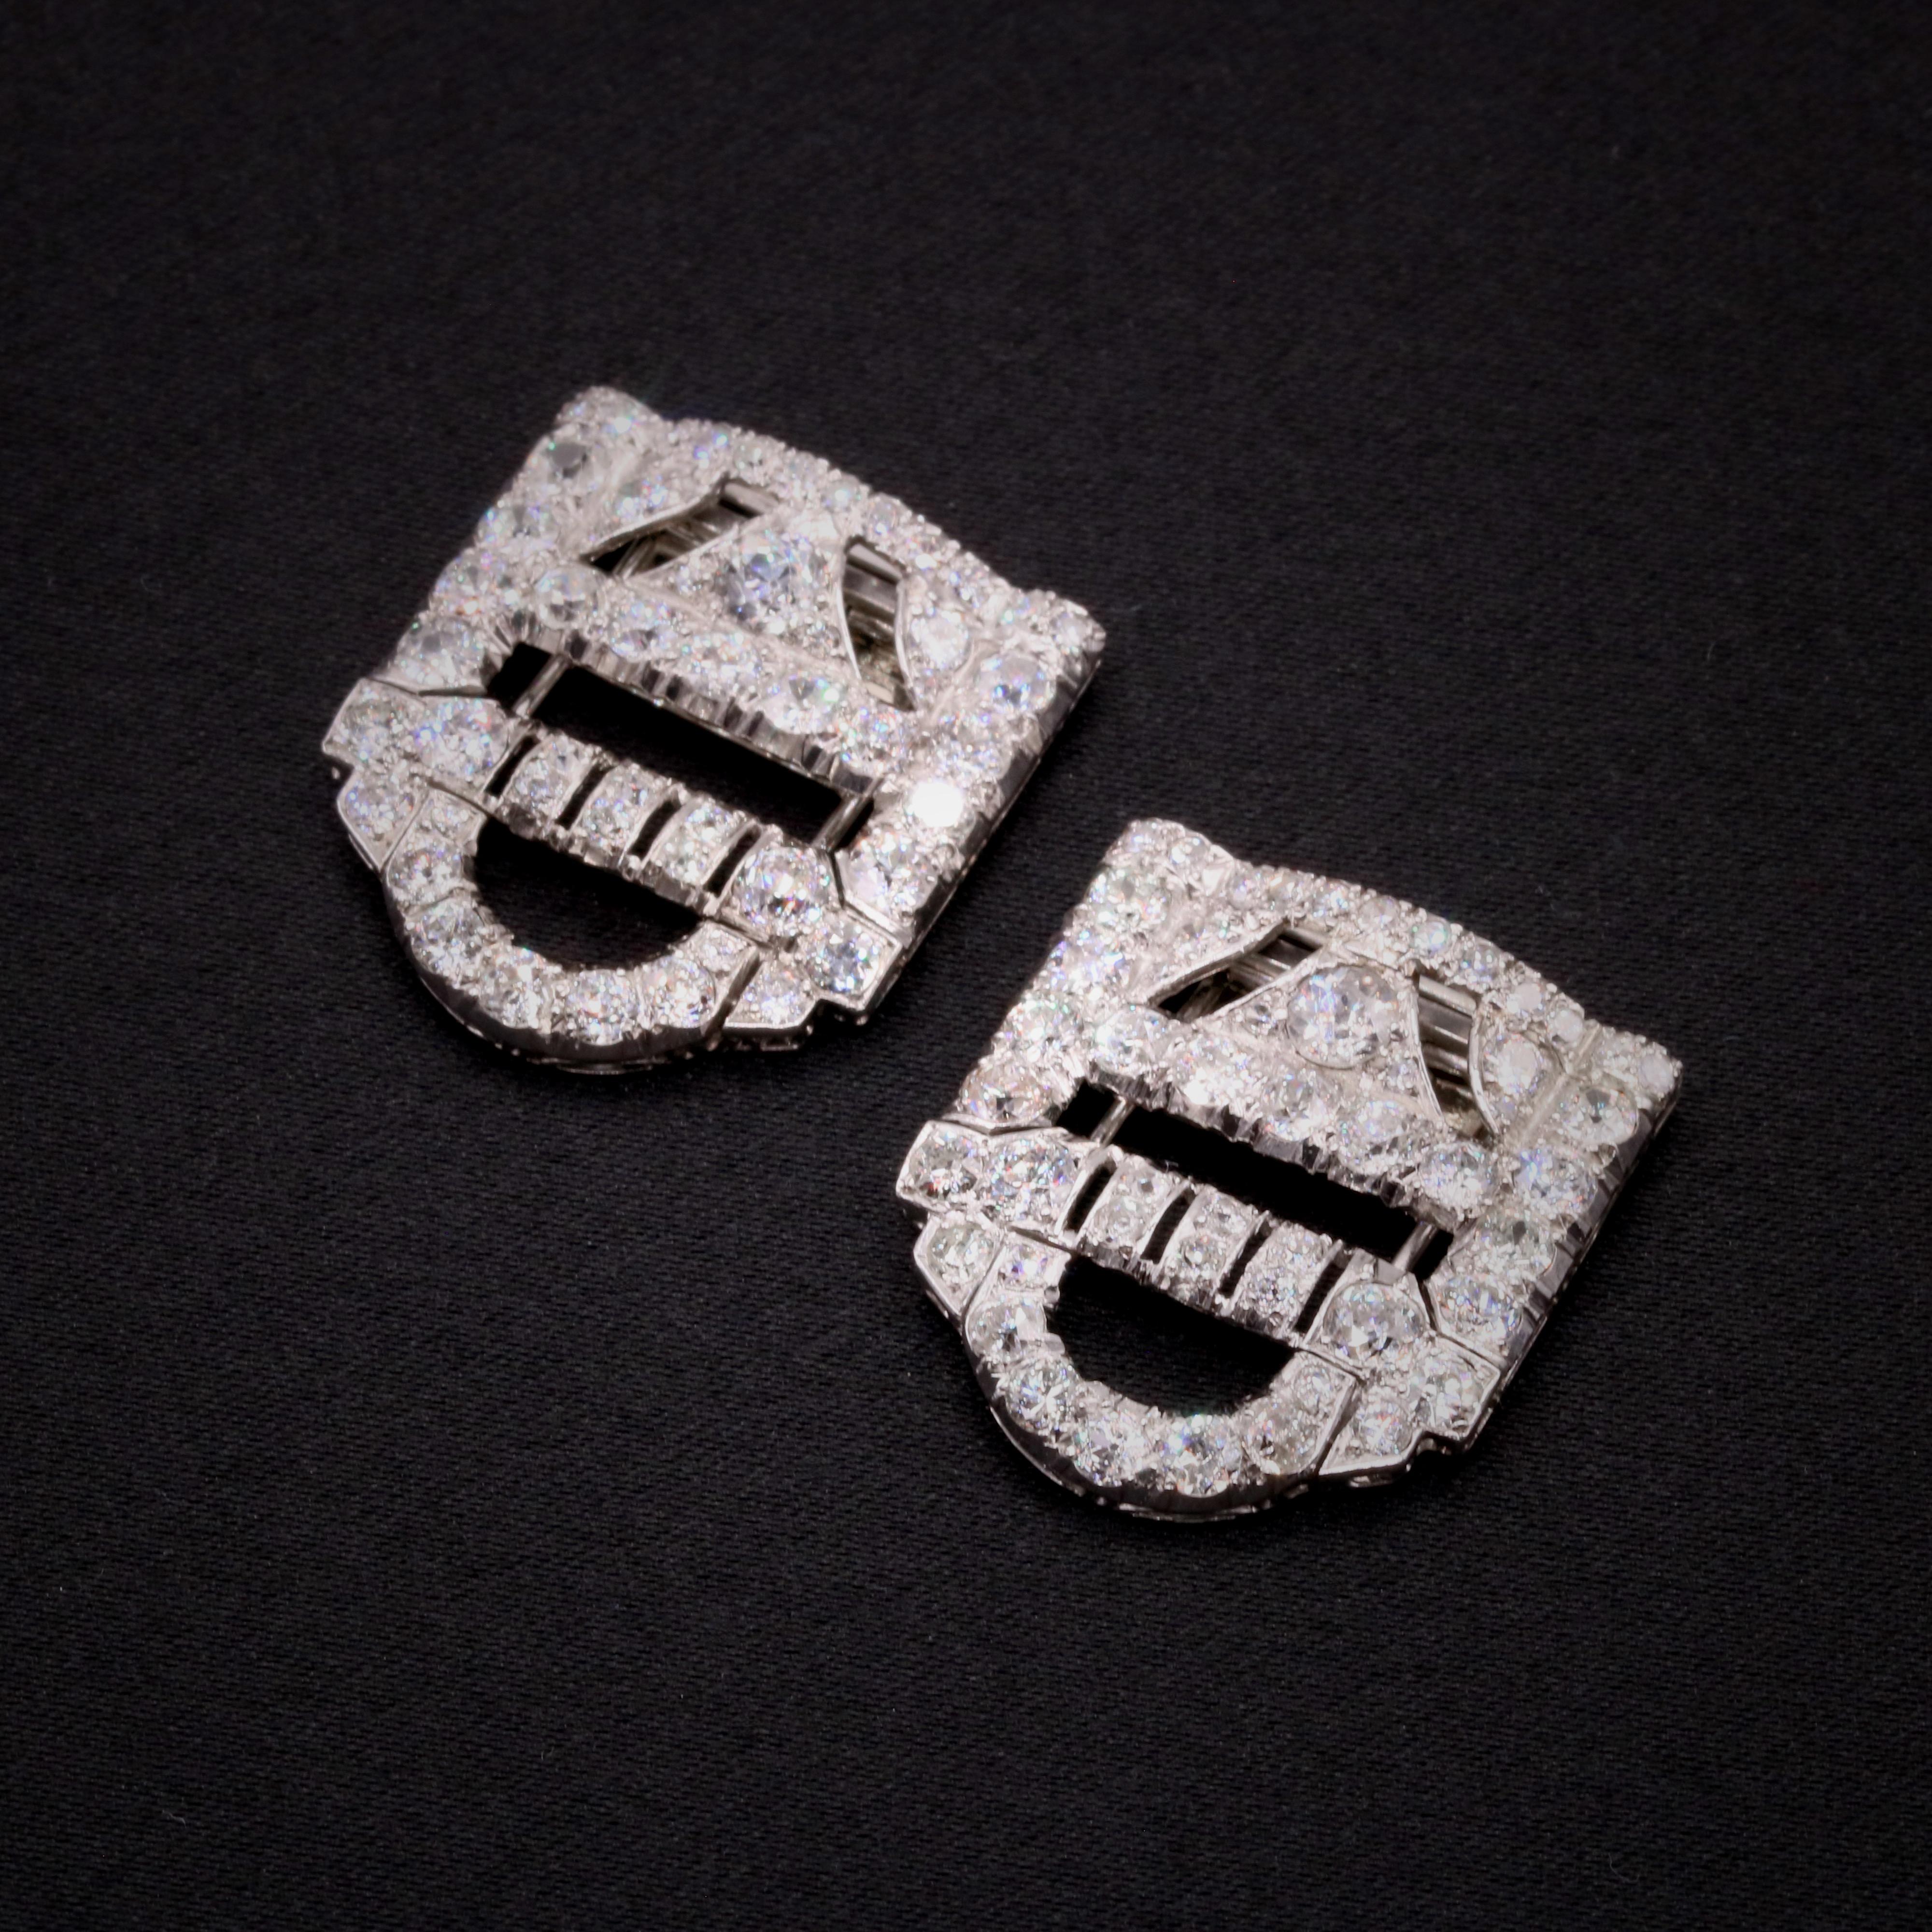 Old European Cut Art Deco 1930s 18K White Gold 7ctw Old Cut Diamond Dress Clips Brooches For Sale